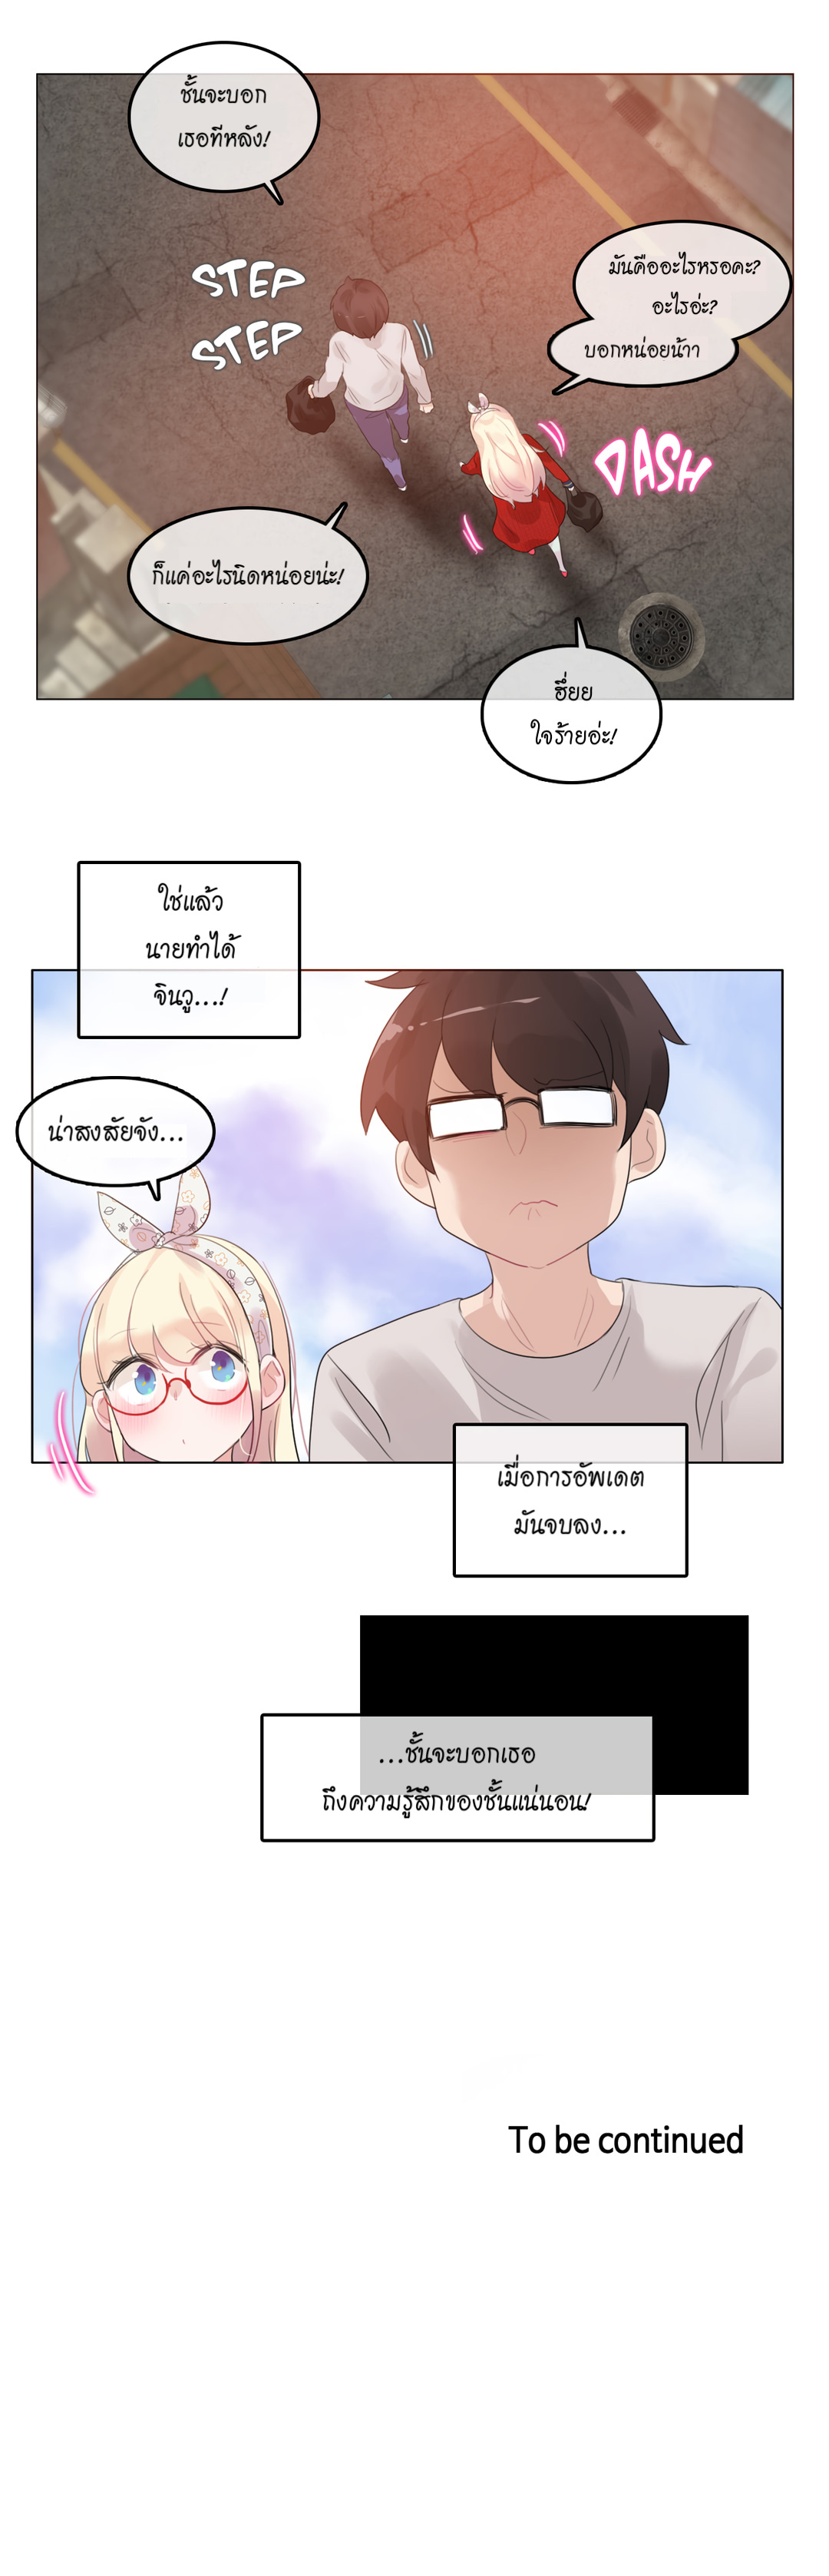 A Pervert’s Daily Life54 (22)